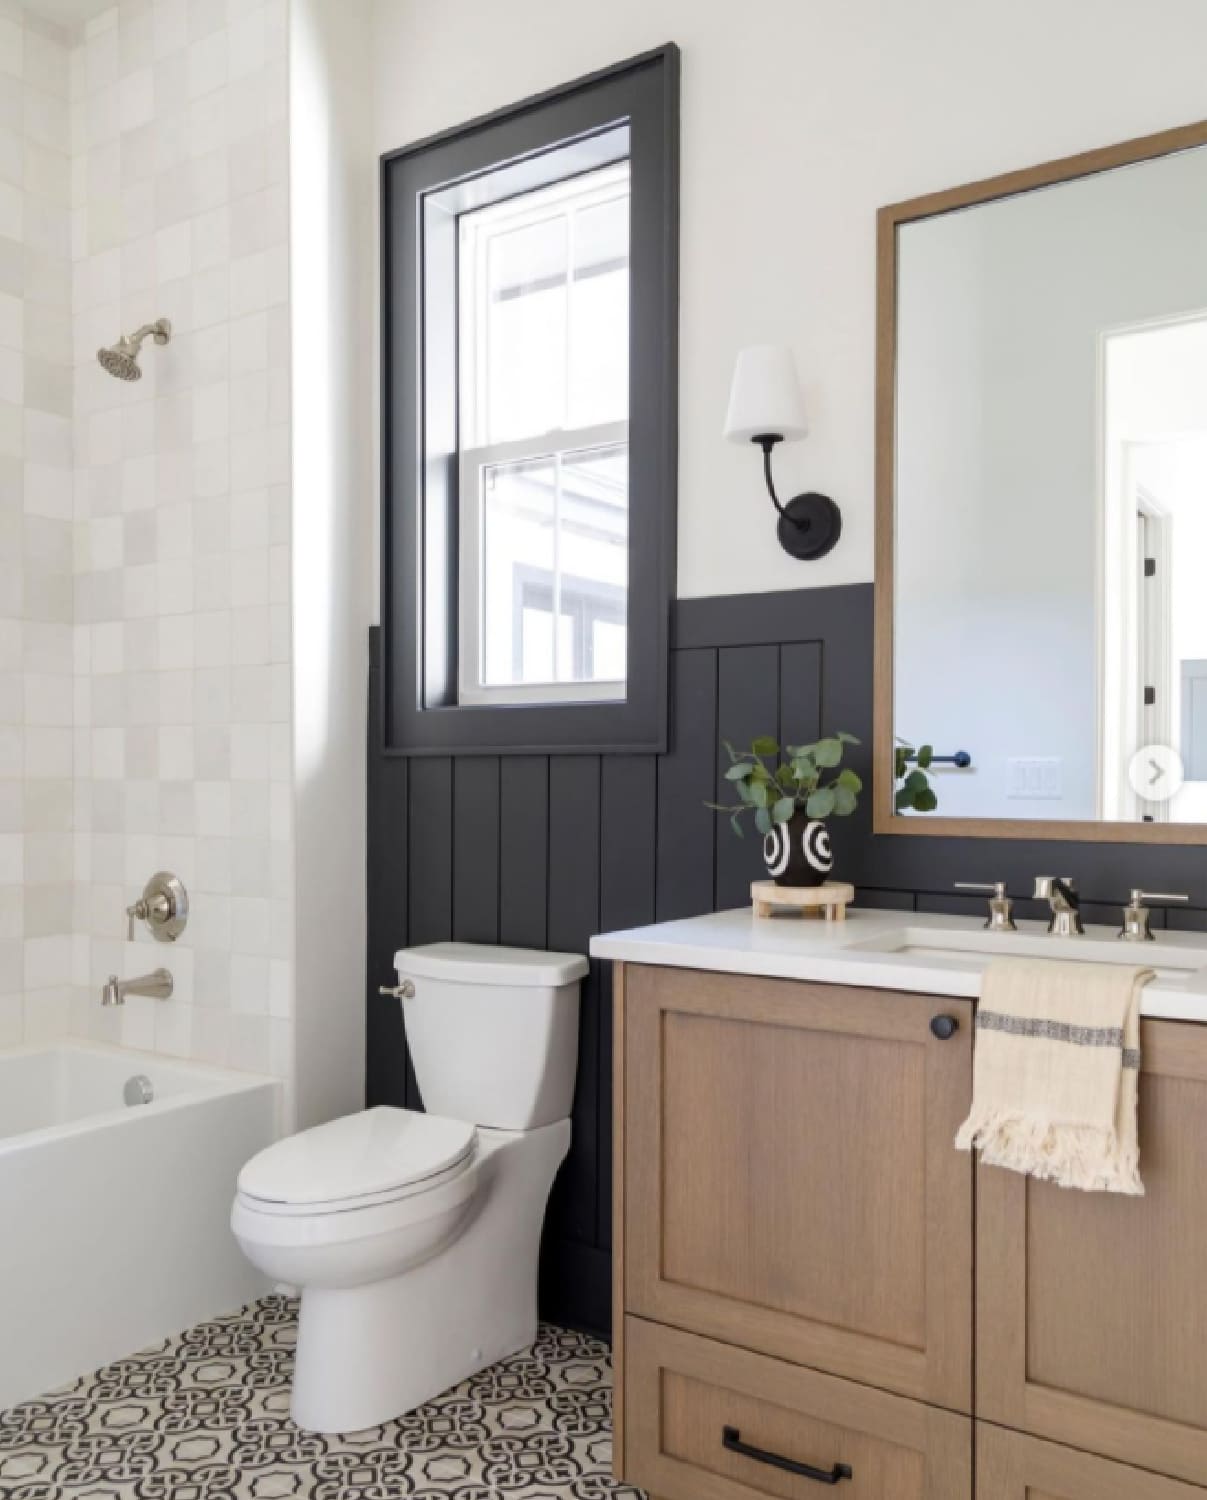 dark black vertical shiplap walls with black and white tiled floor in a small bathroom.